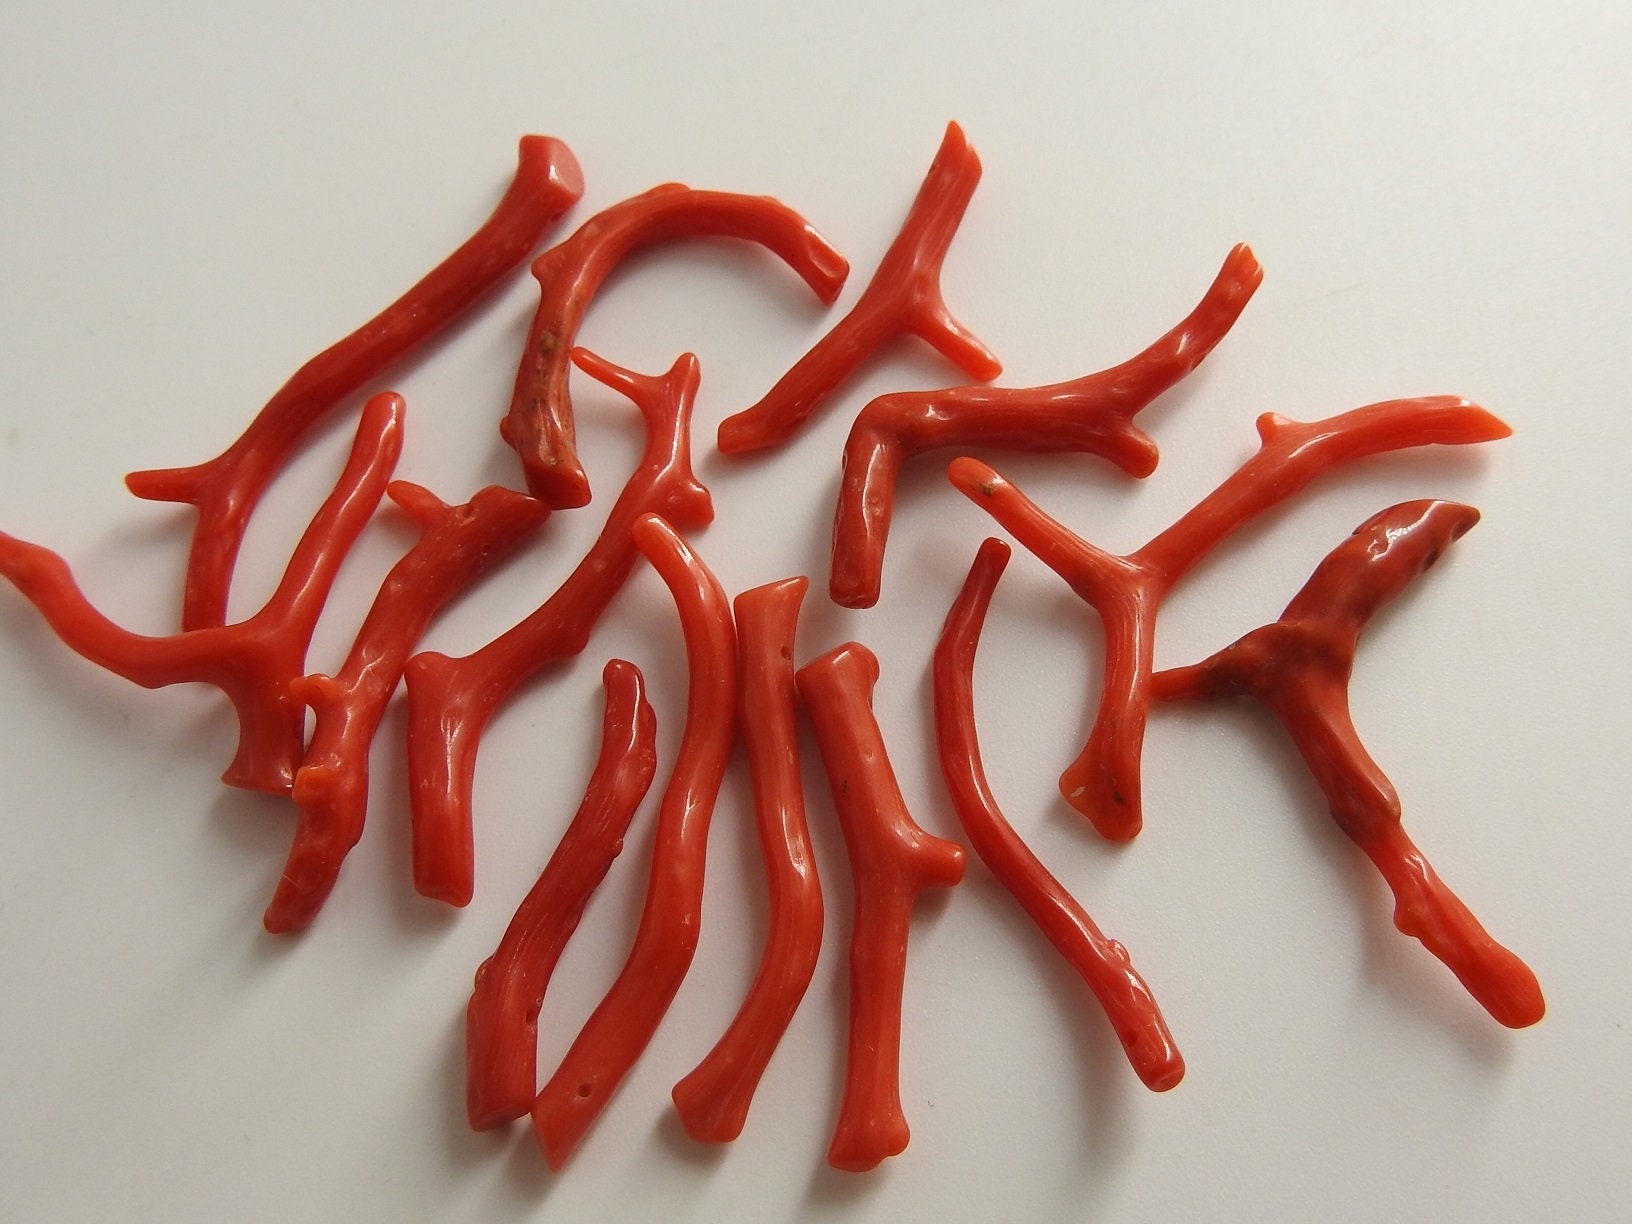 Red Coral Natural Loose Rough Stick,Branches,Polished,Loose Raw,For Making Jewelry,10 Grams 25MM Long Approx,Minerals,Wholesaler BK-CR1 | Save 33% - Rajasthan Living 15